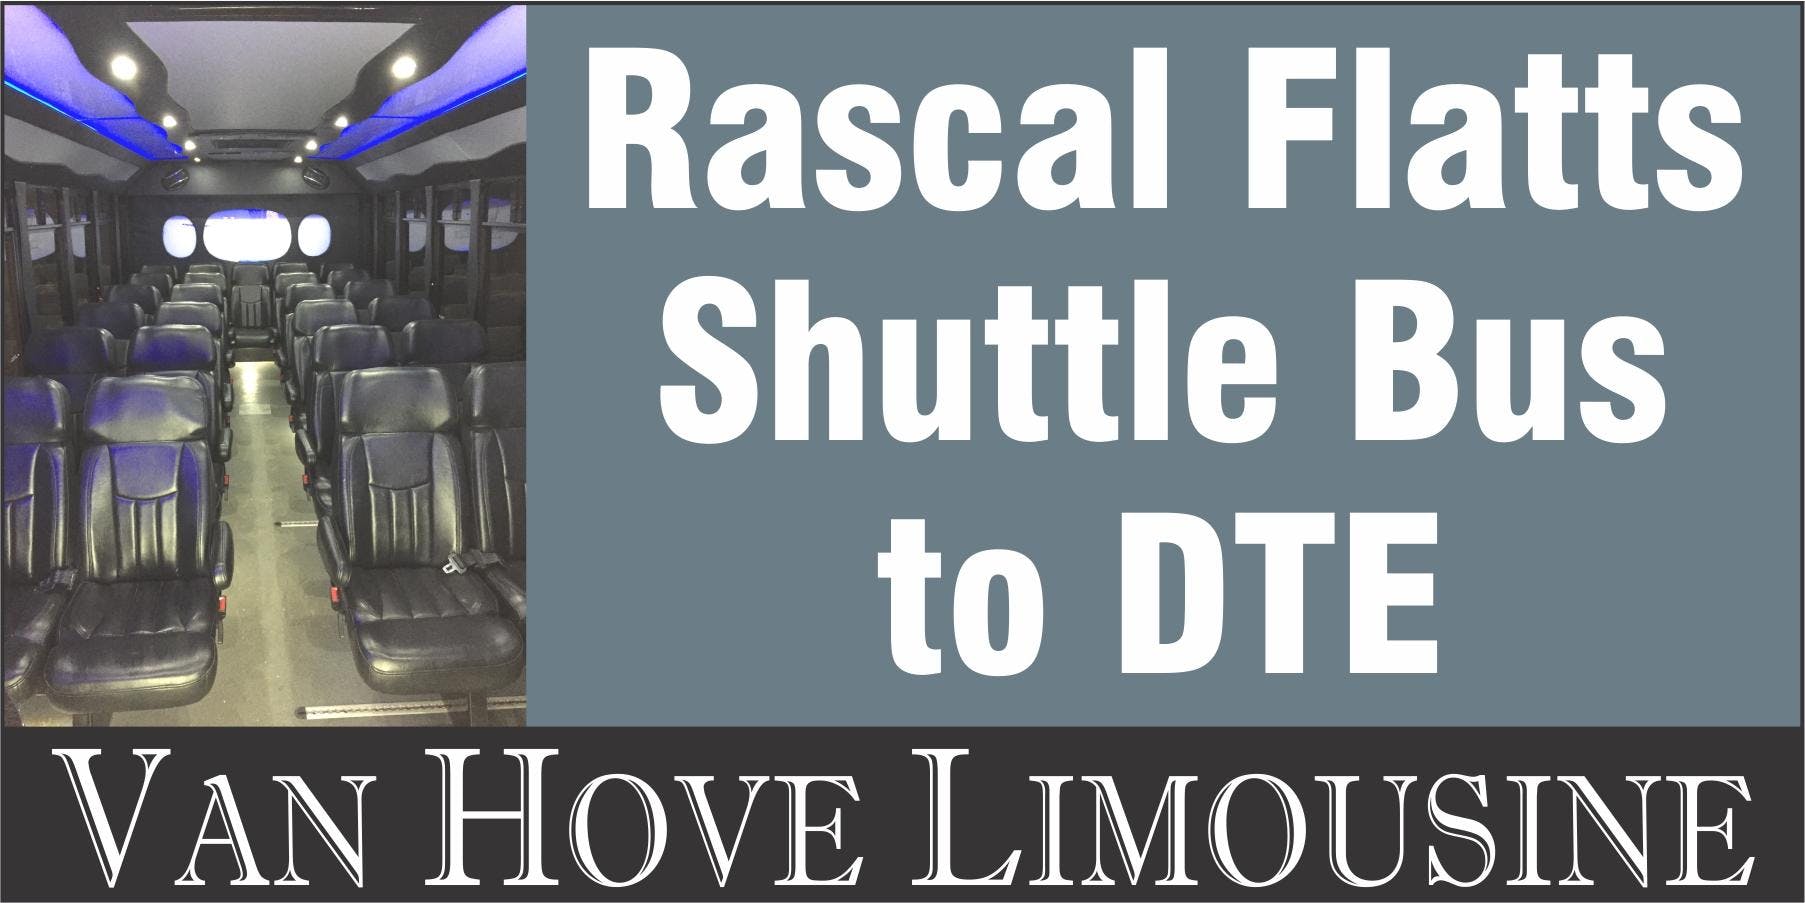 Rascal Flatts Shuttle Bus to DTE from Hamlin Pub 22 Mile & Hayes